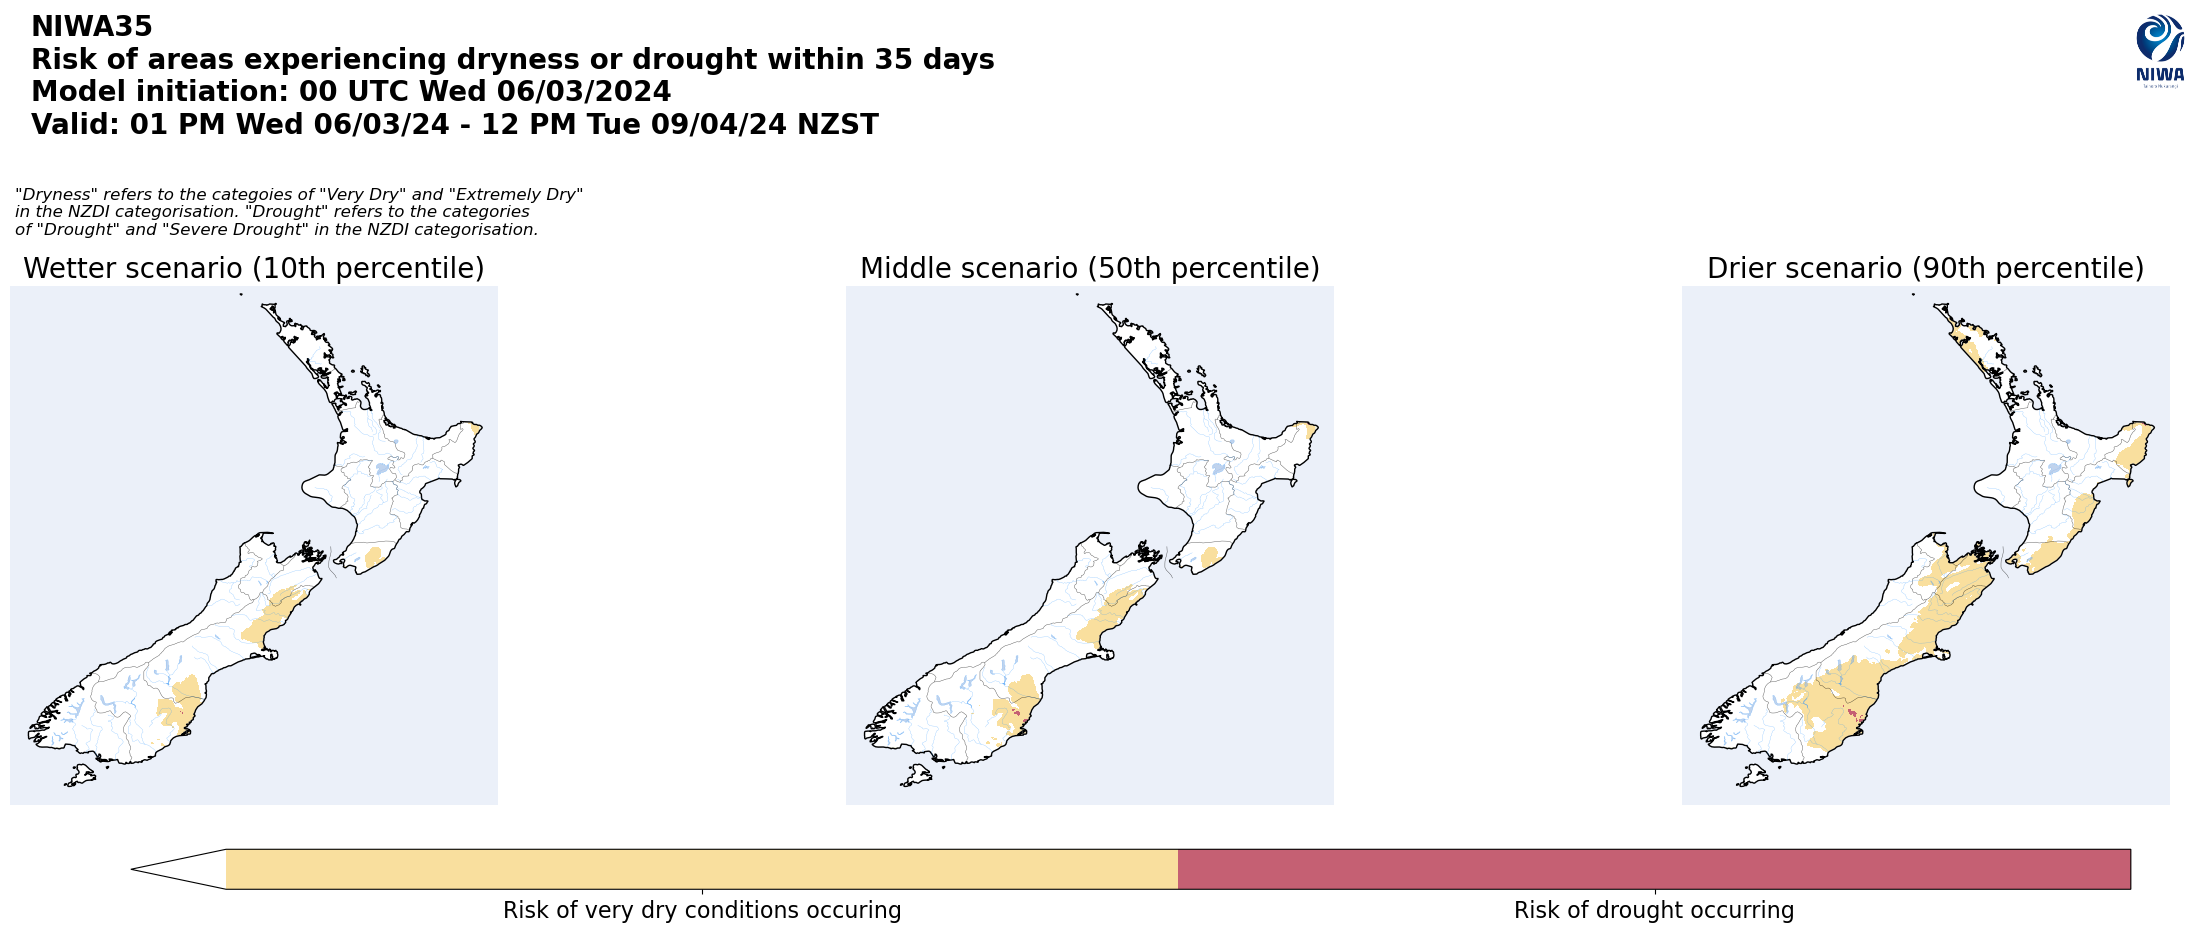 Risk of areas experiencing dryness or drought within 35 days from 6 March 2024